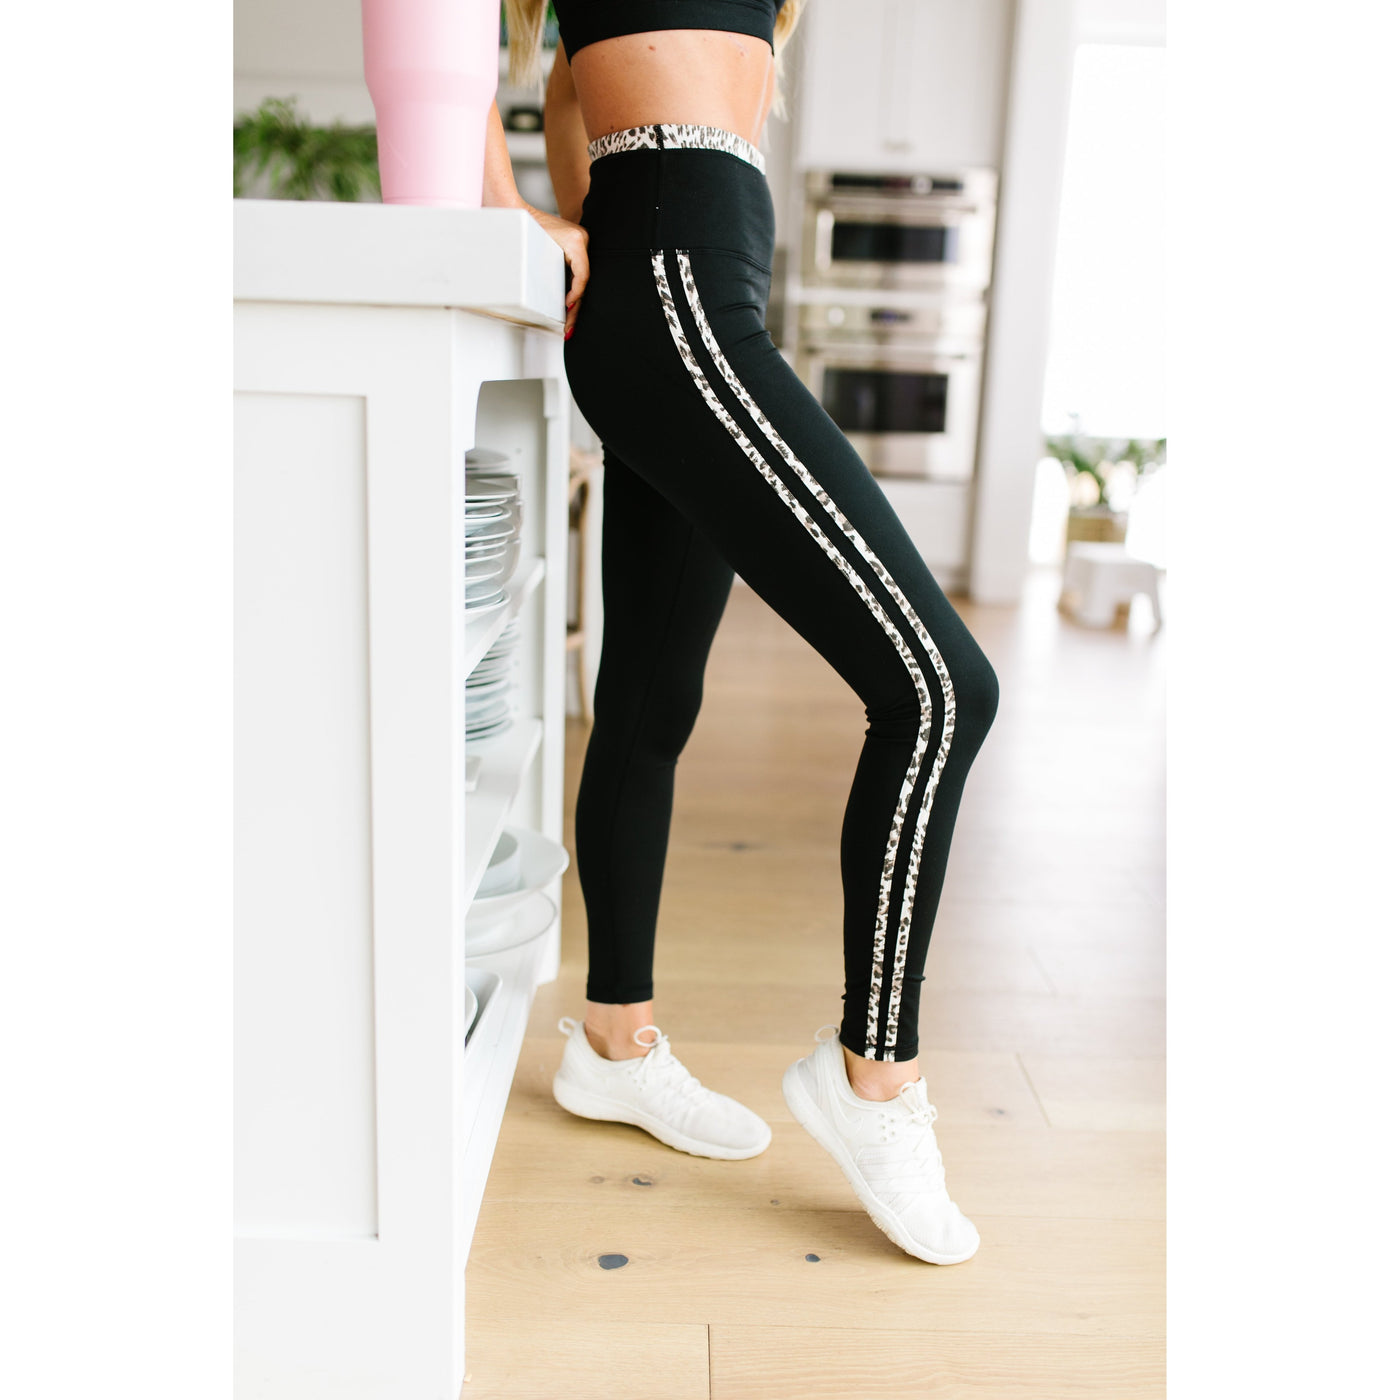 Evasive Action Athletic Leggings-W Bottom-Graceful & Chic Boutique, Family Clothing Store in Waxahachie, Texas